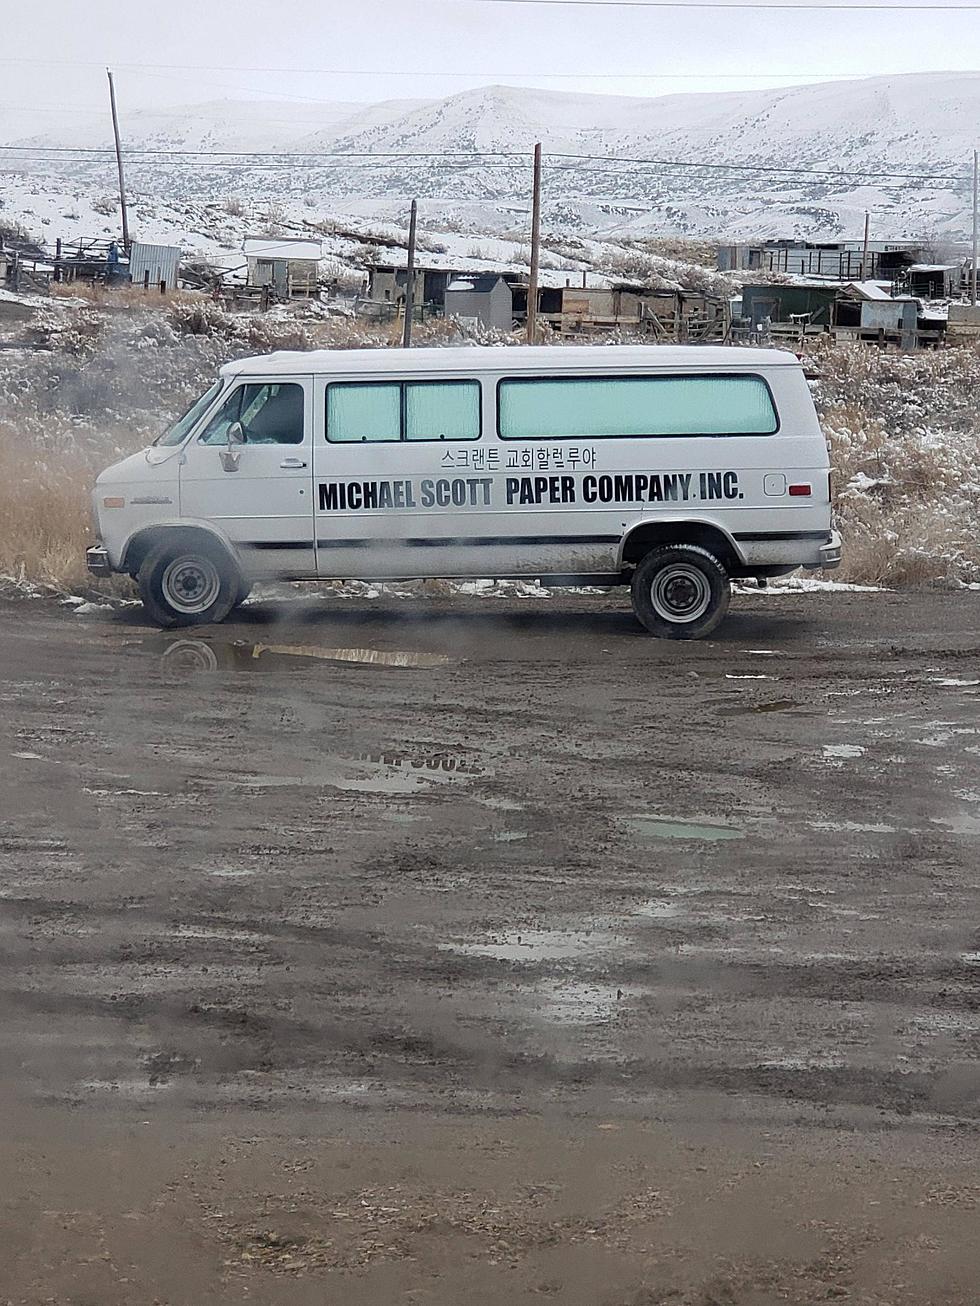 Memorabilia From The Office Has Been Spotted In Wyoming